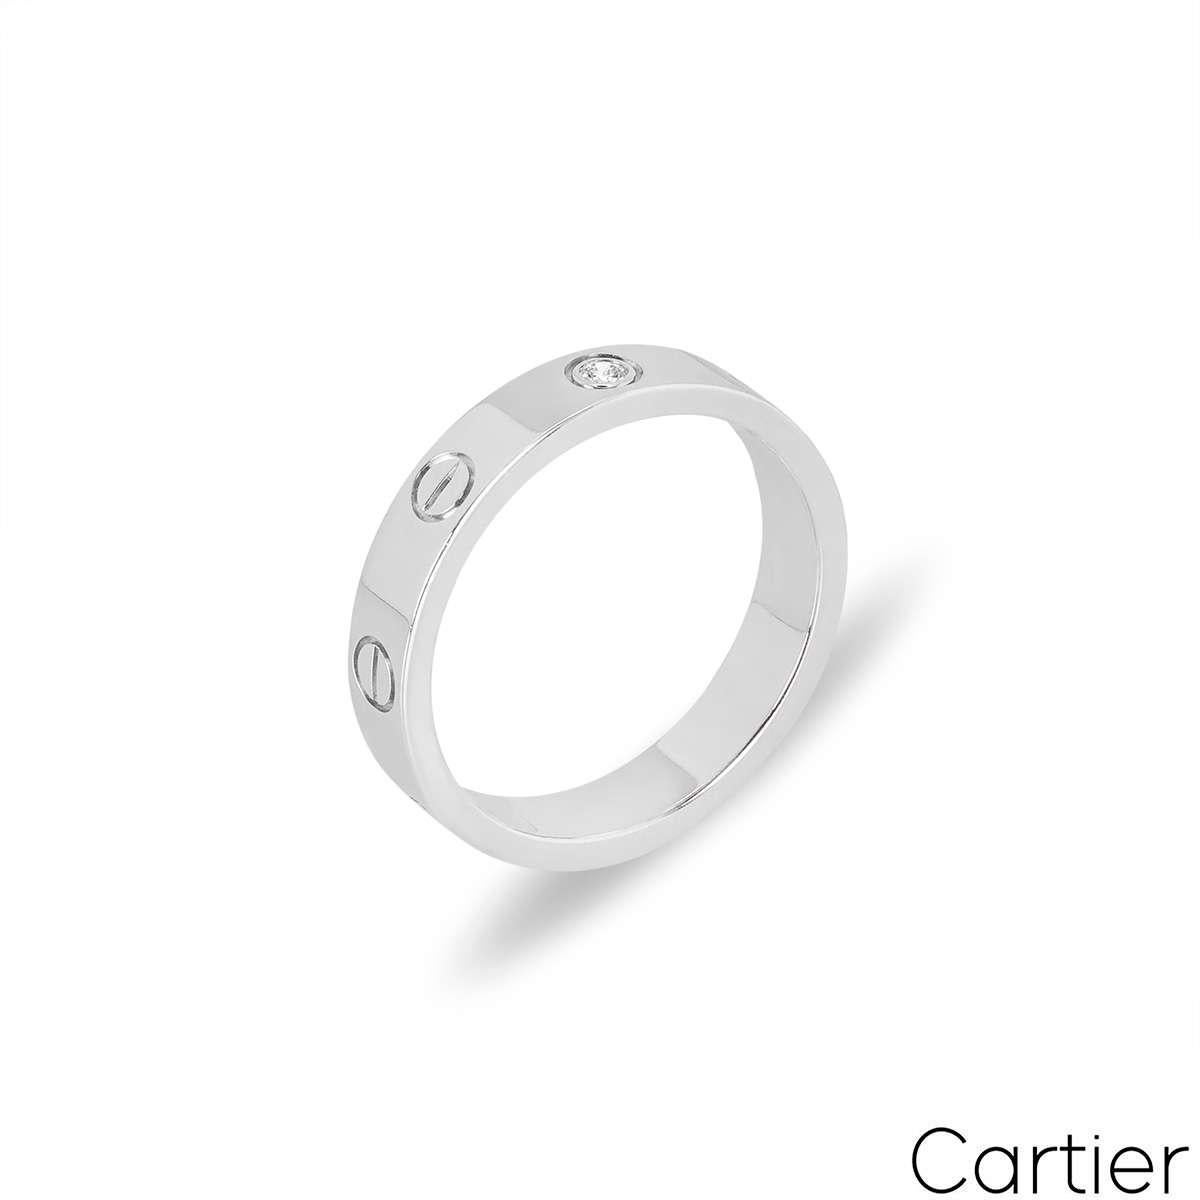 A Cartier diamond wedding band in white gold from the Love collection. The ring comprises of the iconic Cartier screws motifs and a single round brilliant cut diamond set in the centre, totalling 0.02ct. Measuring 4mm in width, the ring is a size UK